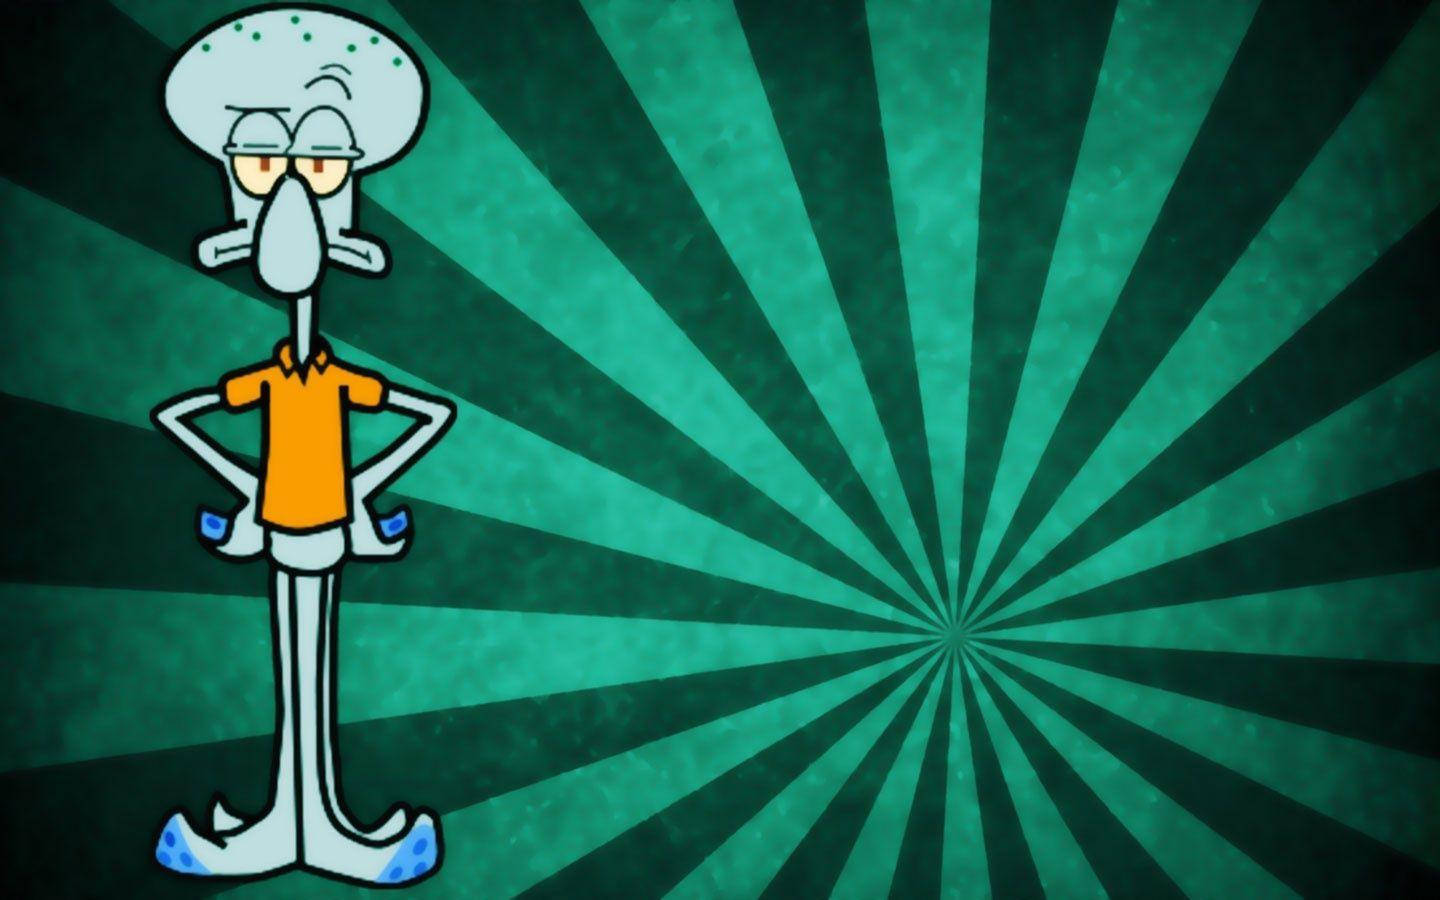 This isn't Squidward's best day, but it's a familiar look to fans of SpongeBob SquarePants Wallpaper